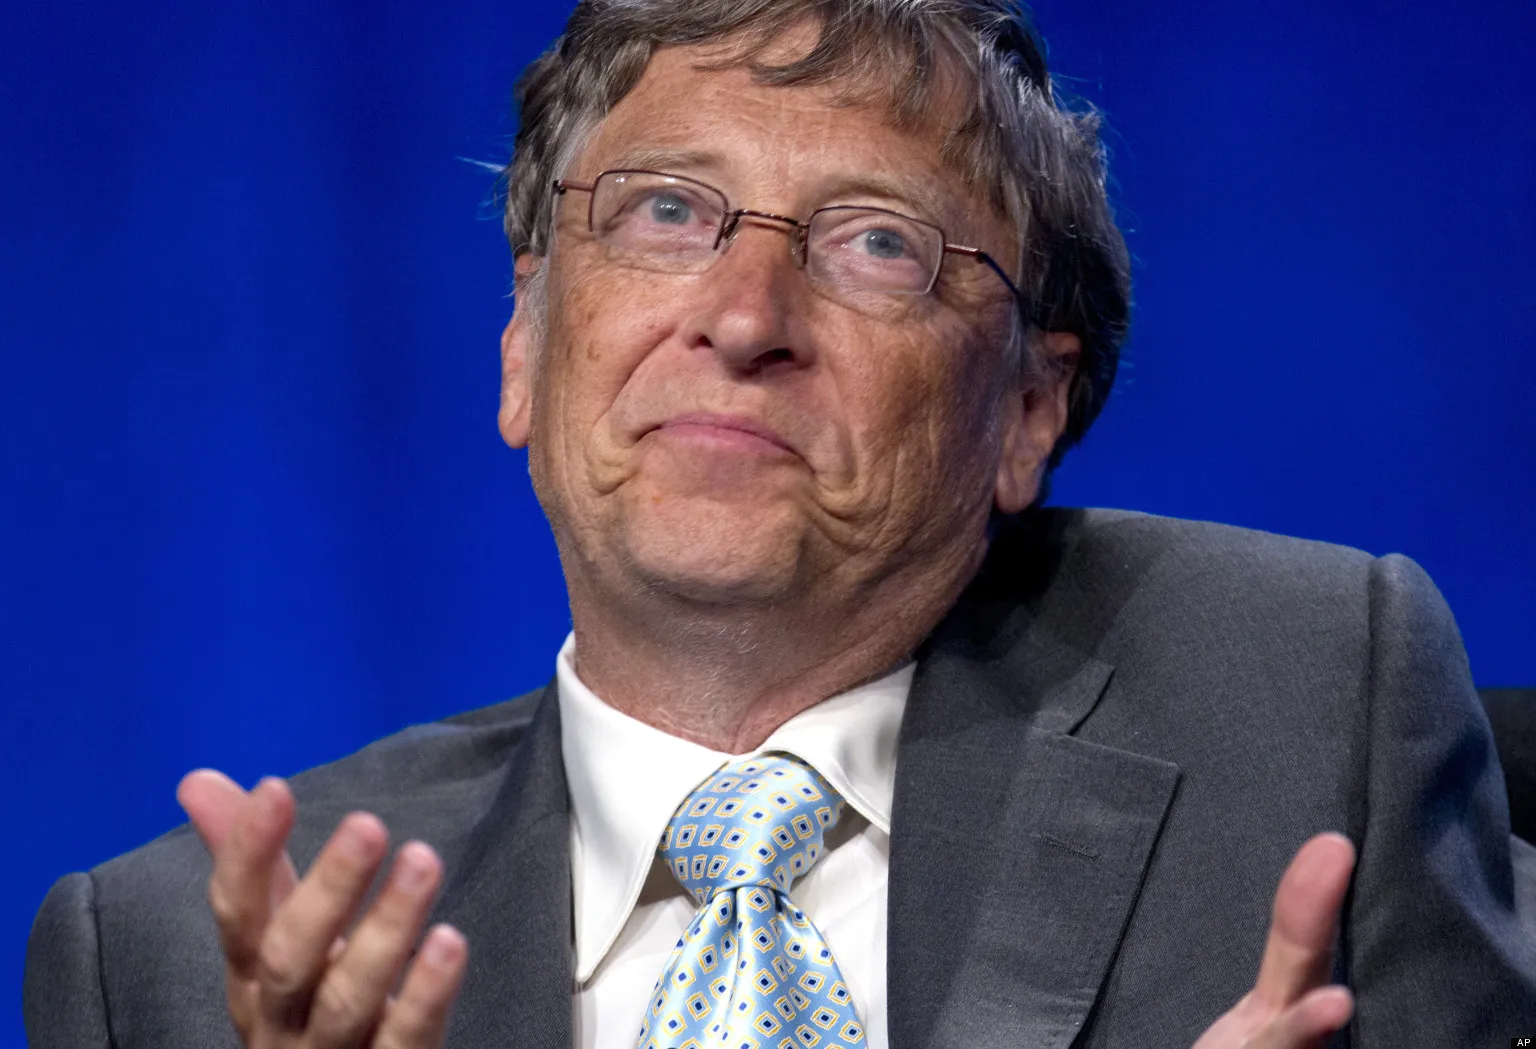 Bill Gates Launches Scheme To Chop Down America’s Forests To ‘Save the Planet’